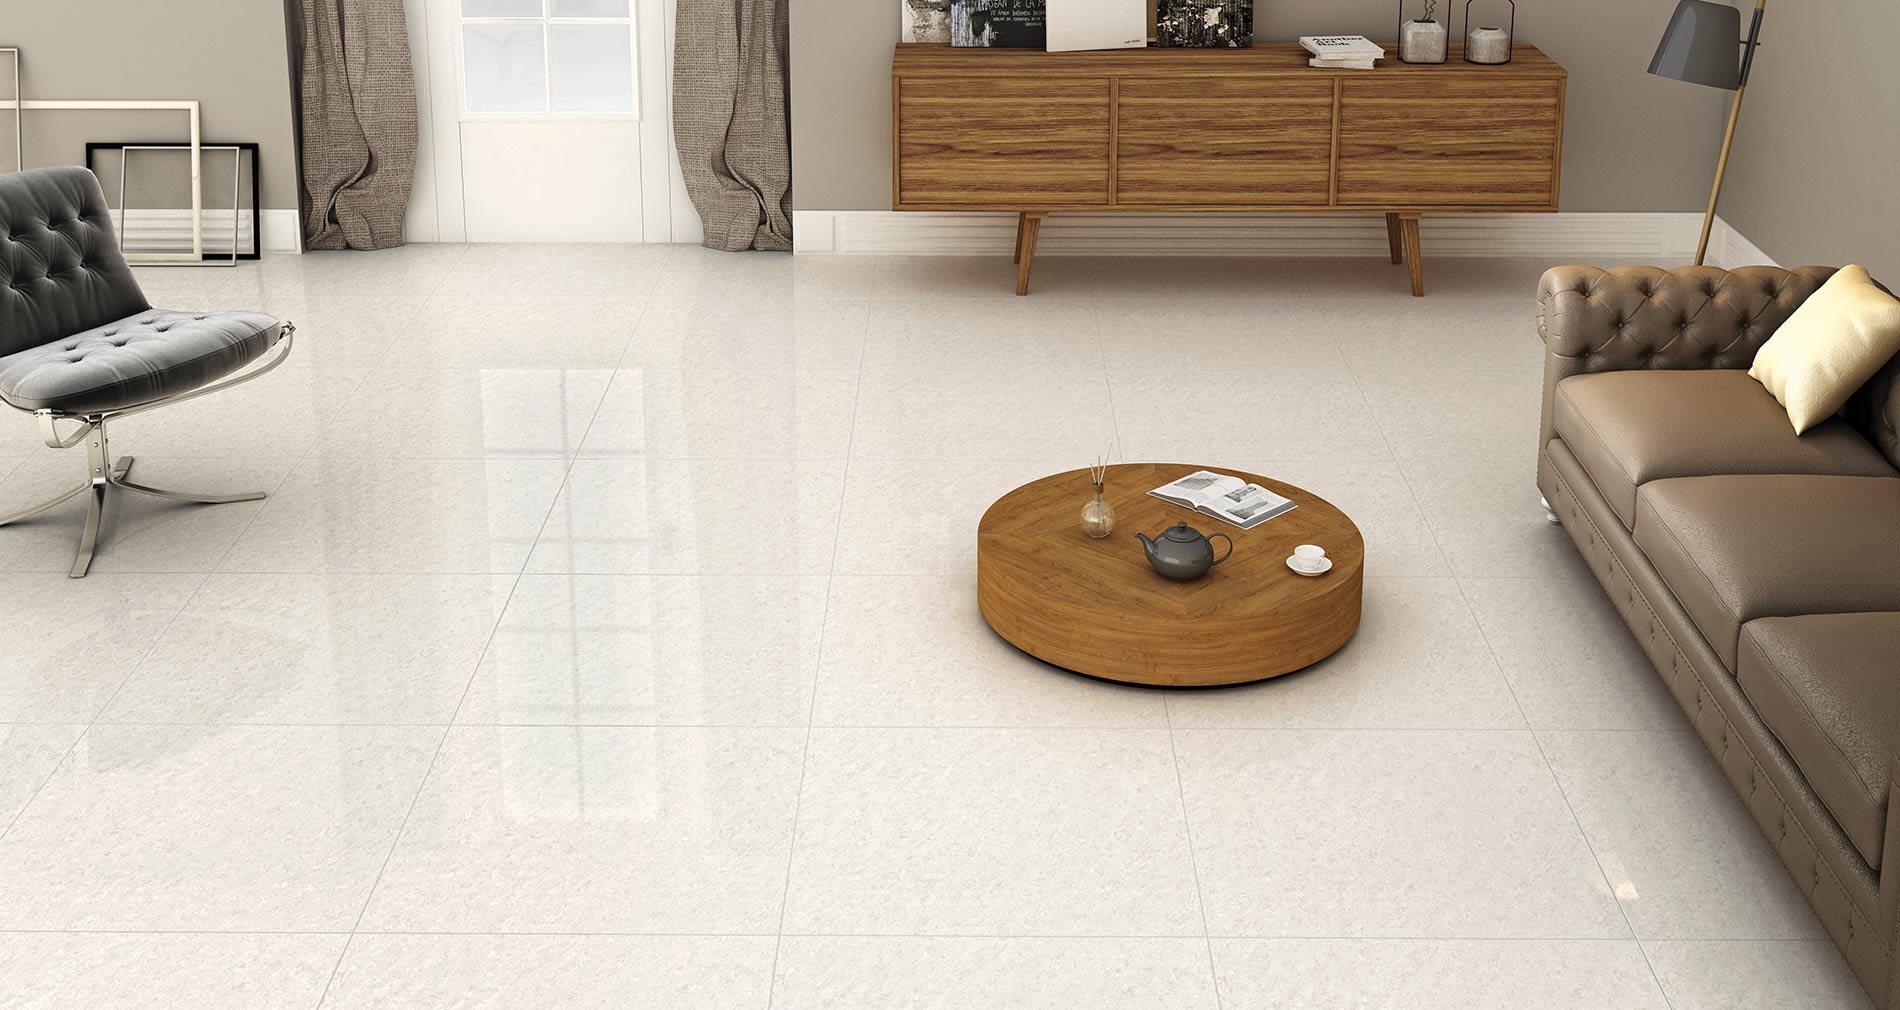 VITRIFIED TILES FLOORING | An Architect Explains And Reviews